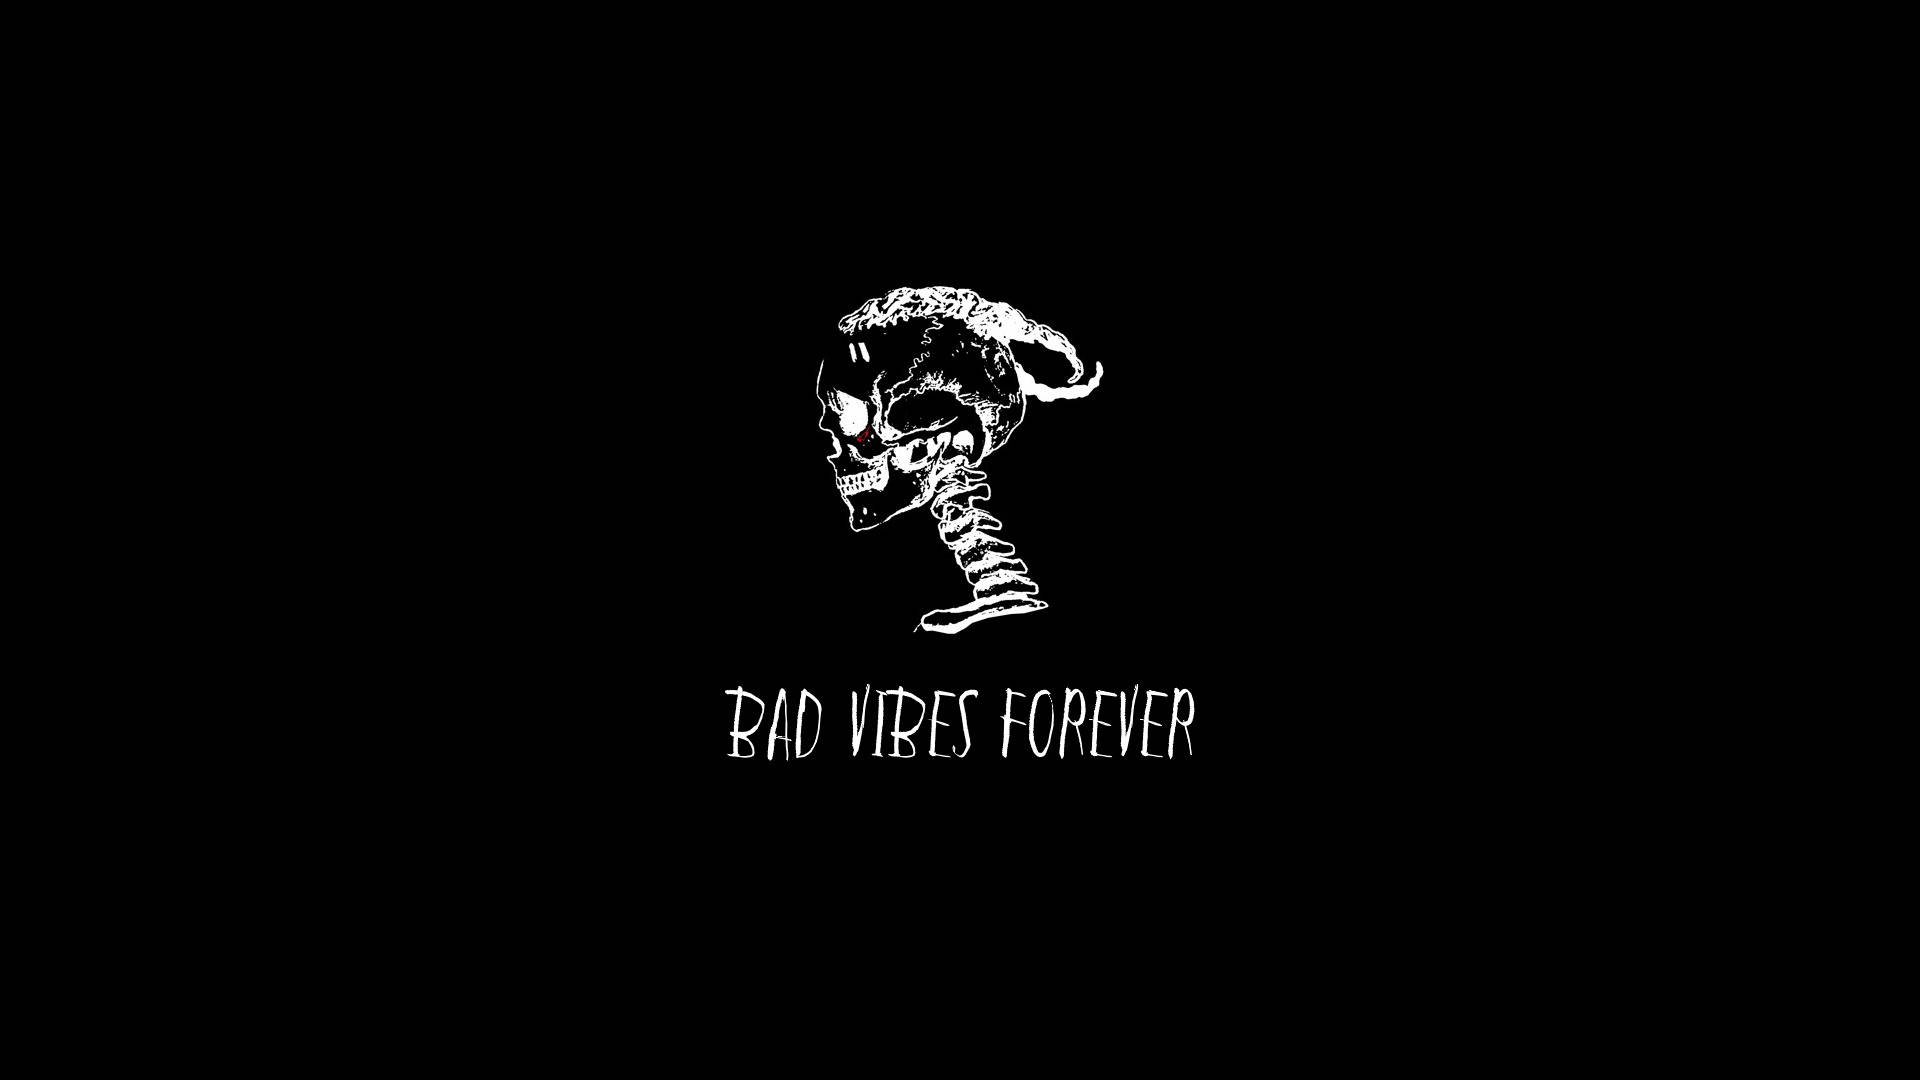 Xx Tentacion Bad Vibes Forever Background